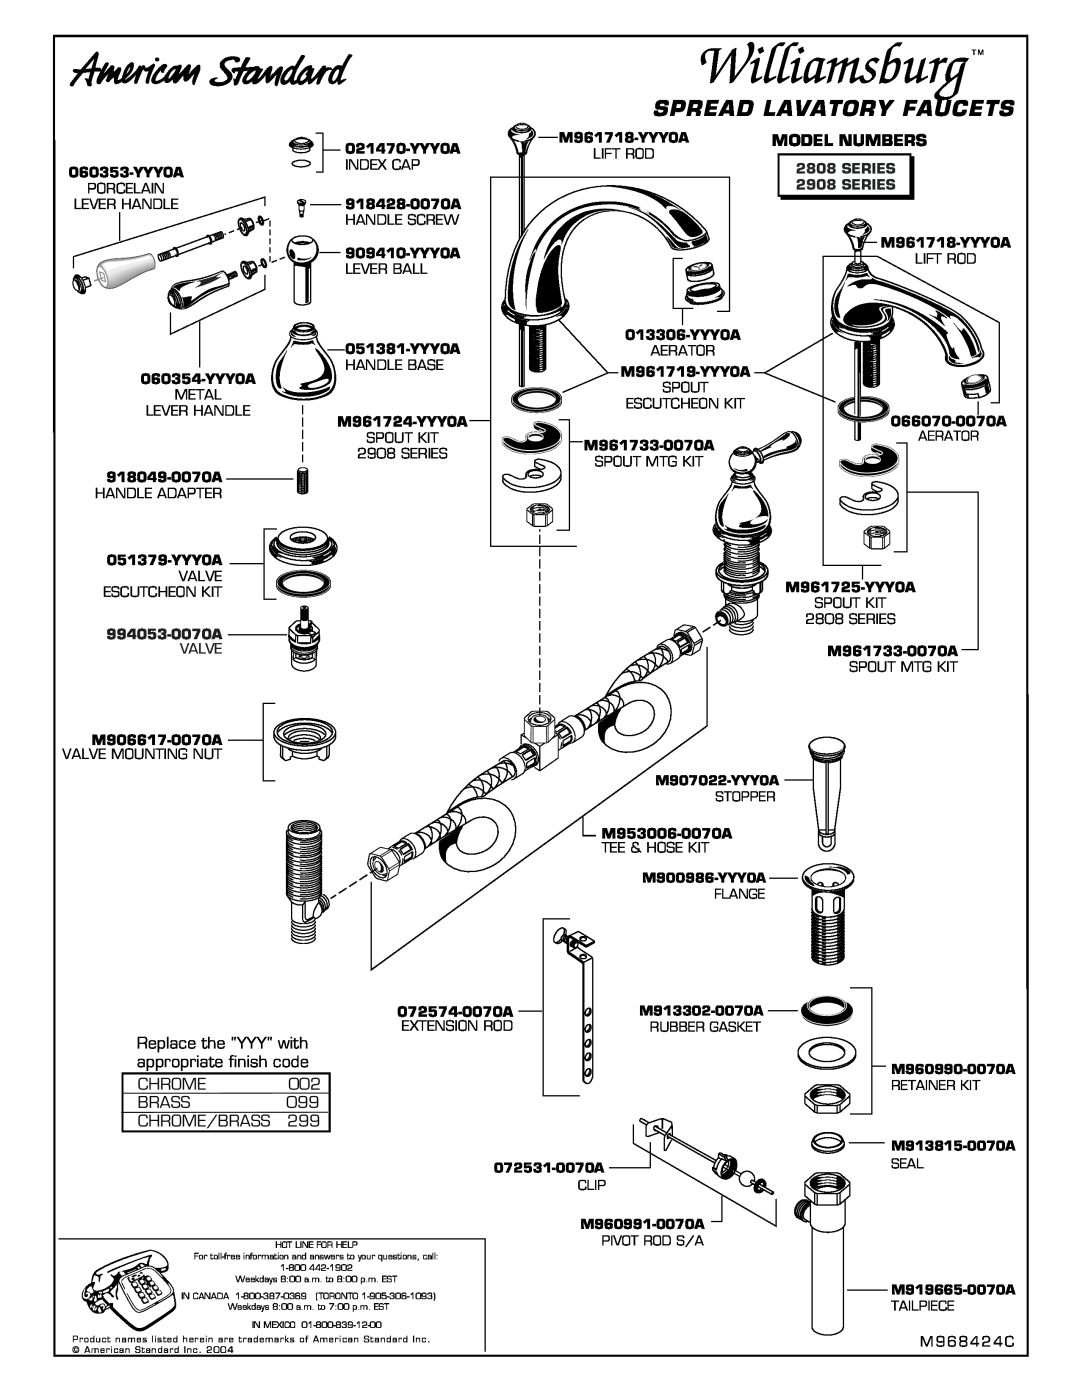 American Standard 2908 Series manual Spread Lavatory Faucets, Model Numbers, Replace the YYY with appropriate finish code 